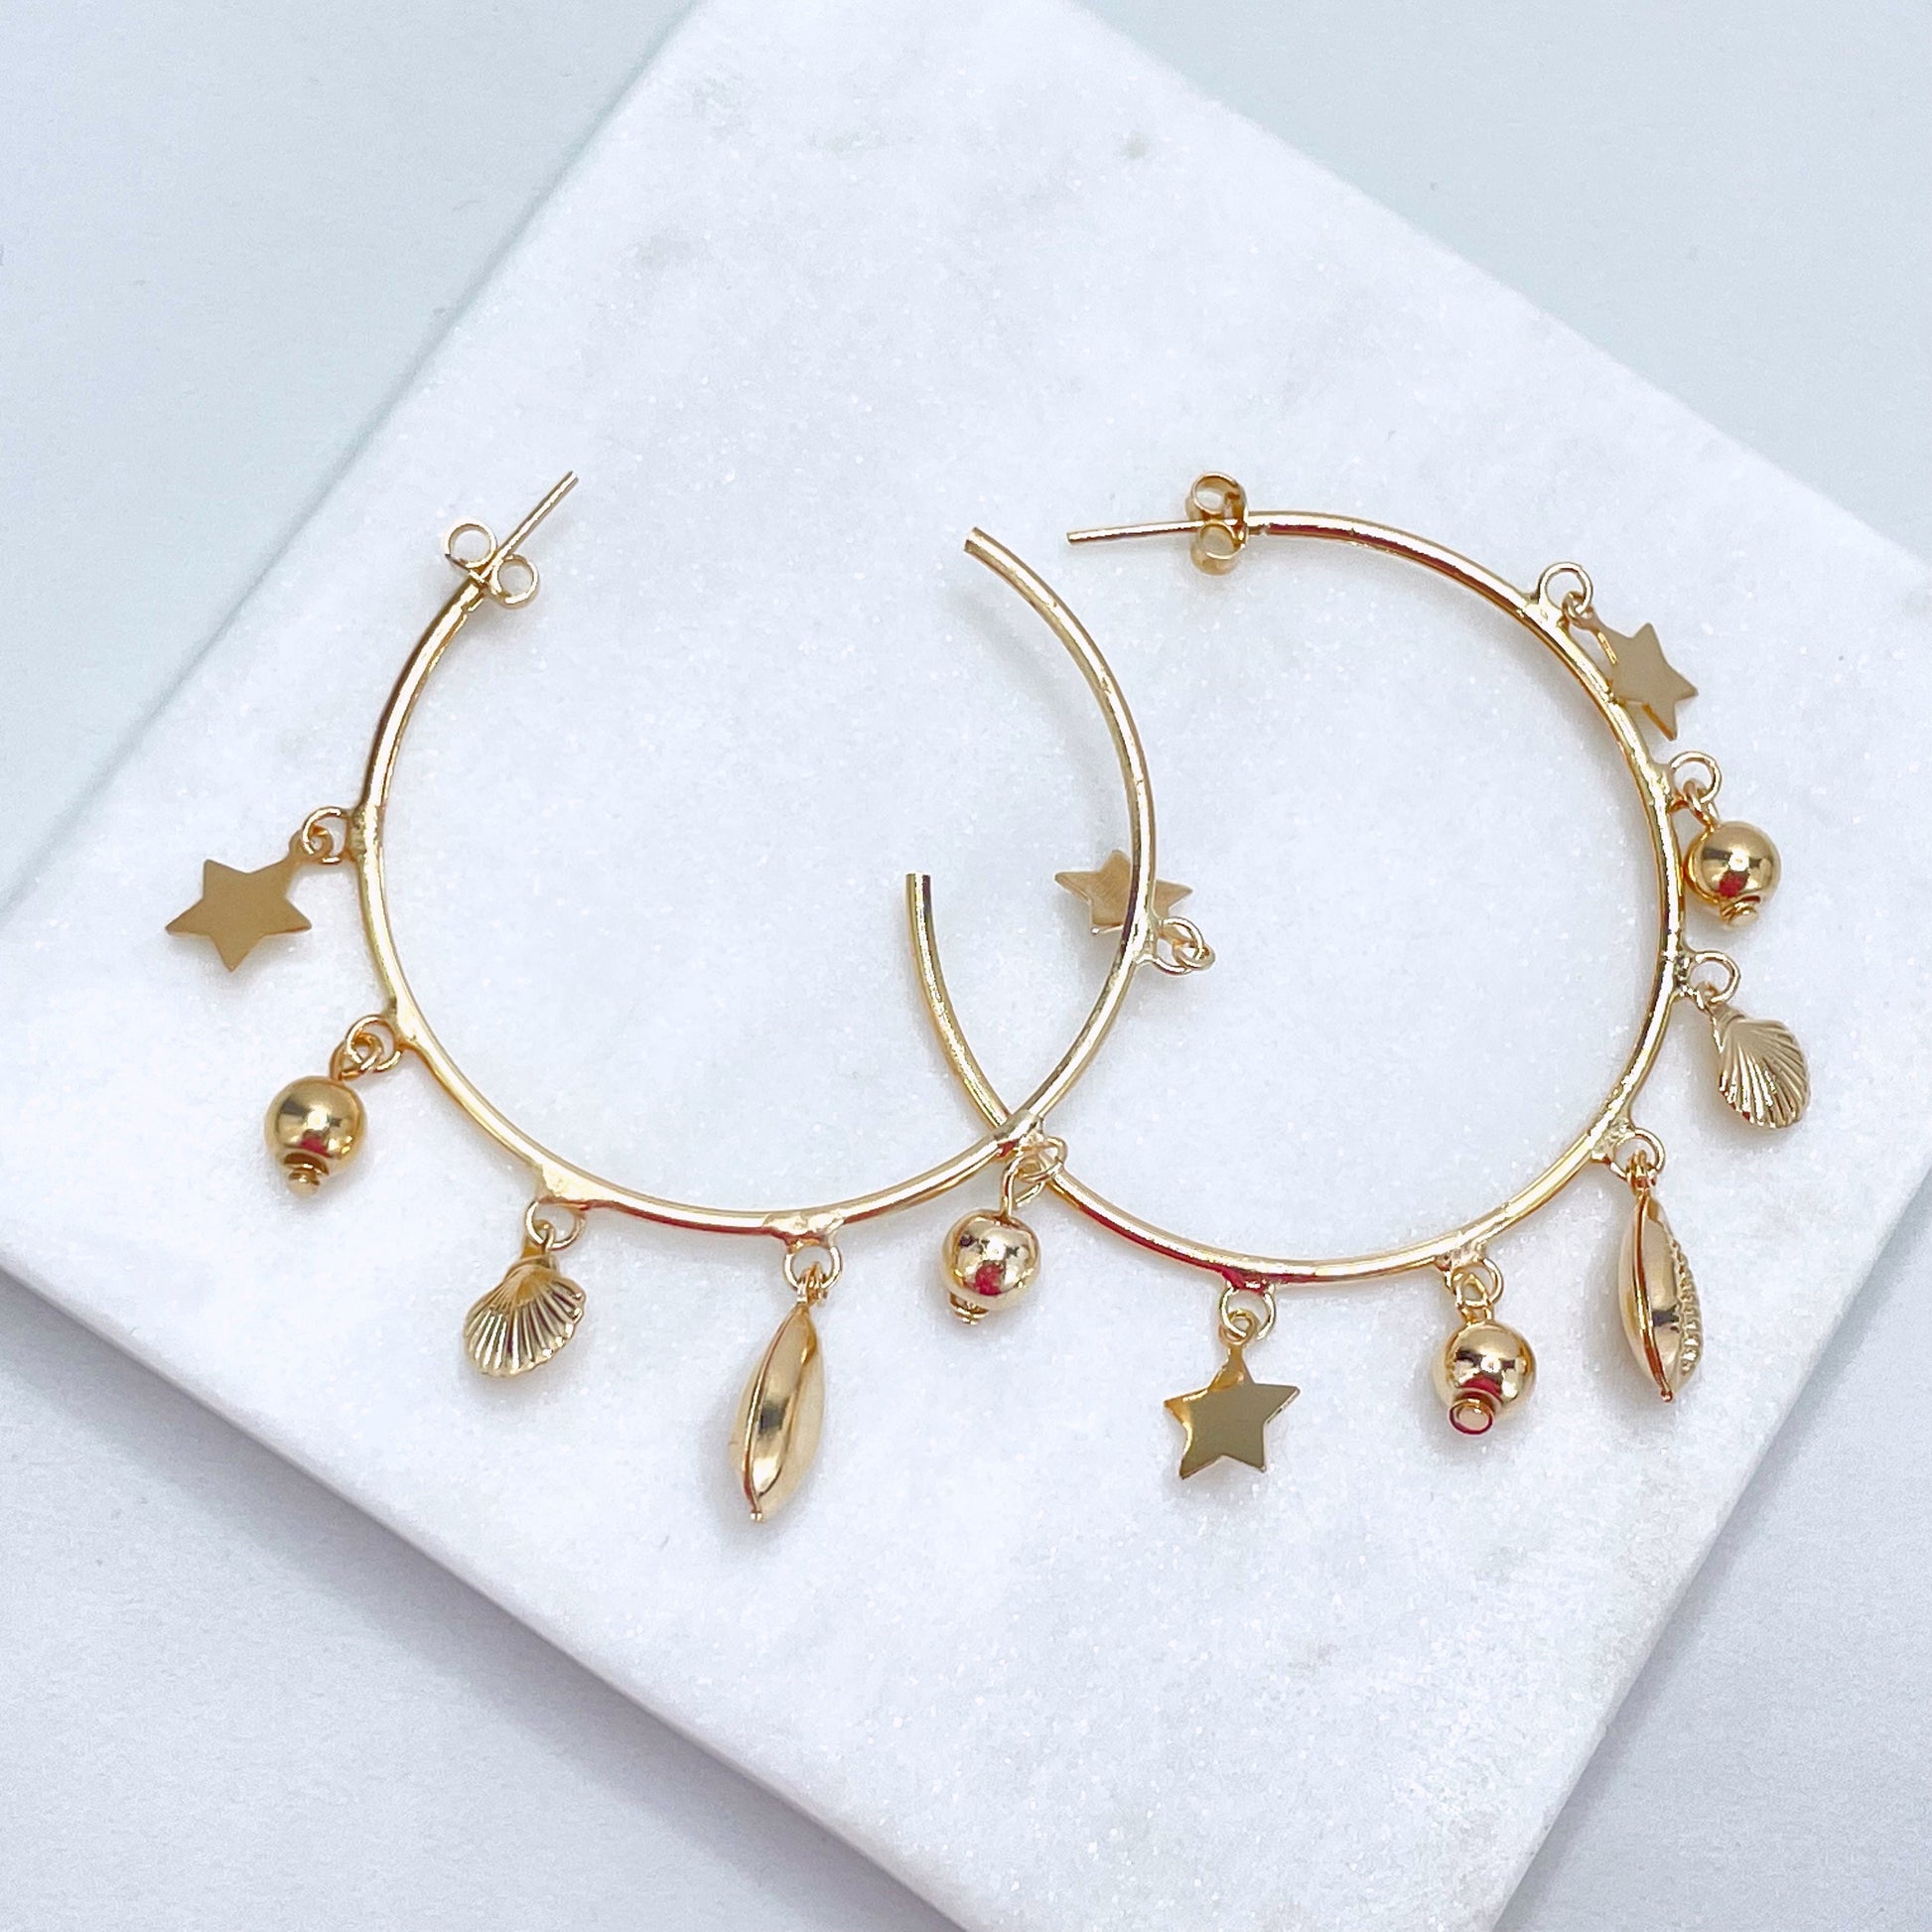 18k Gold Filled 50mm C-Hoops Sea Marine Theme Earrings with Stars, Cowry Shell, Balls Charms, Wholesale Jewelry Making Supplies